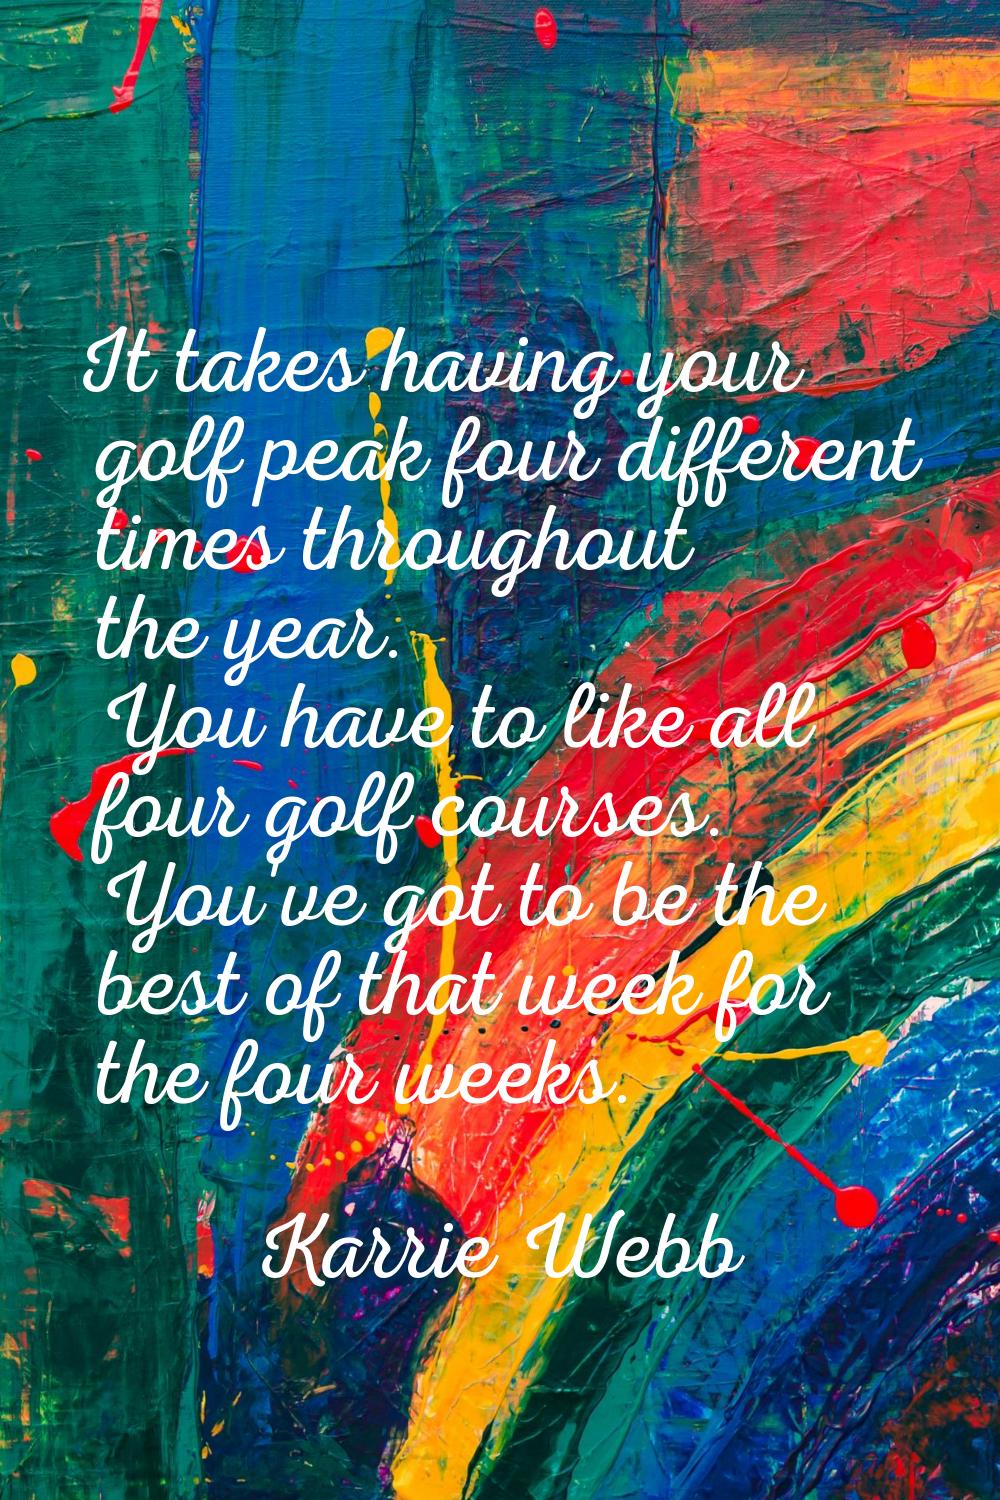 It takes having your golf peak four different times throughout the year. You have to like all four 